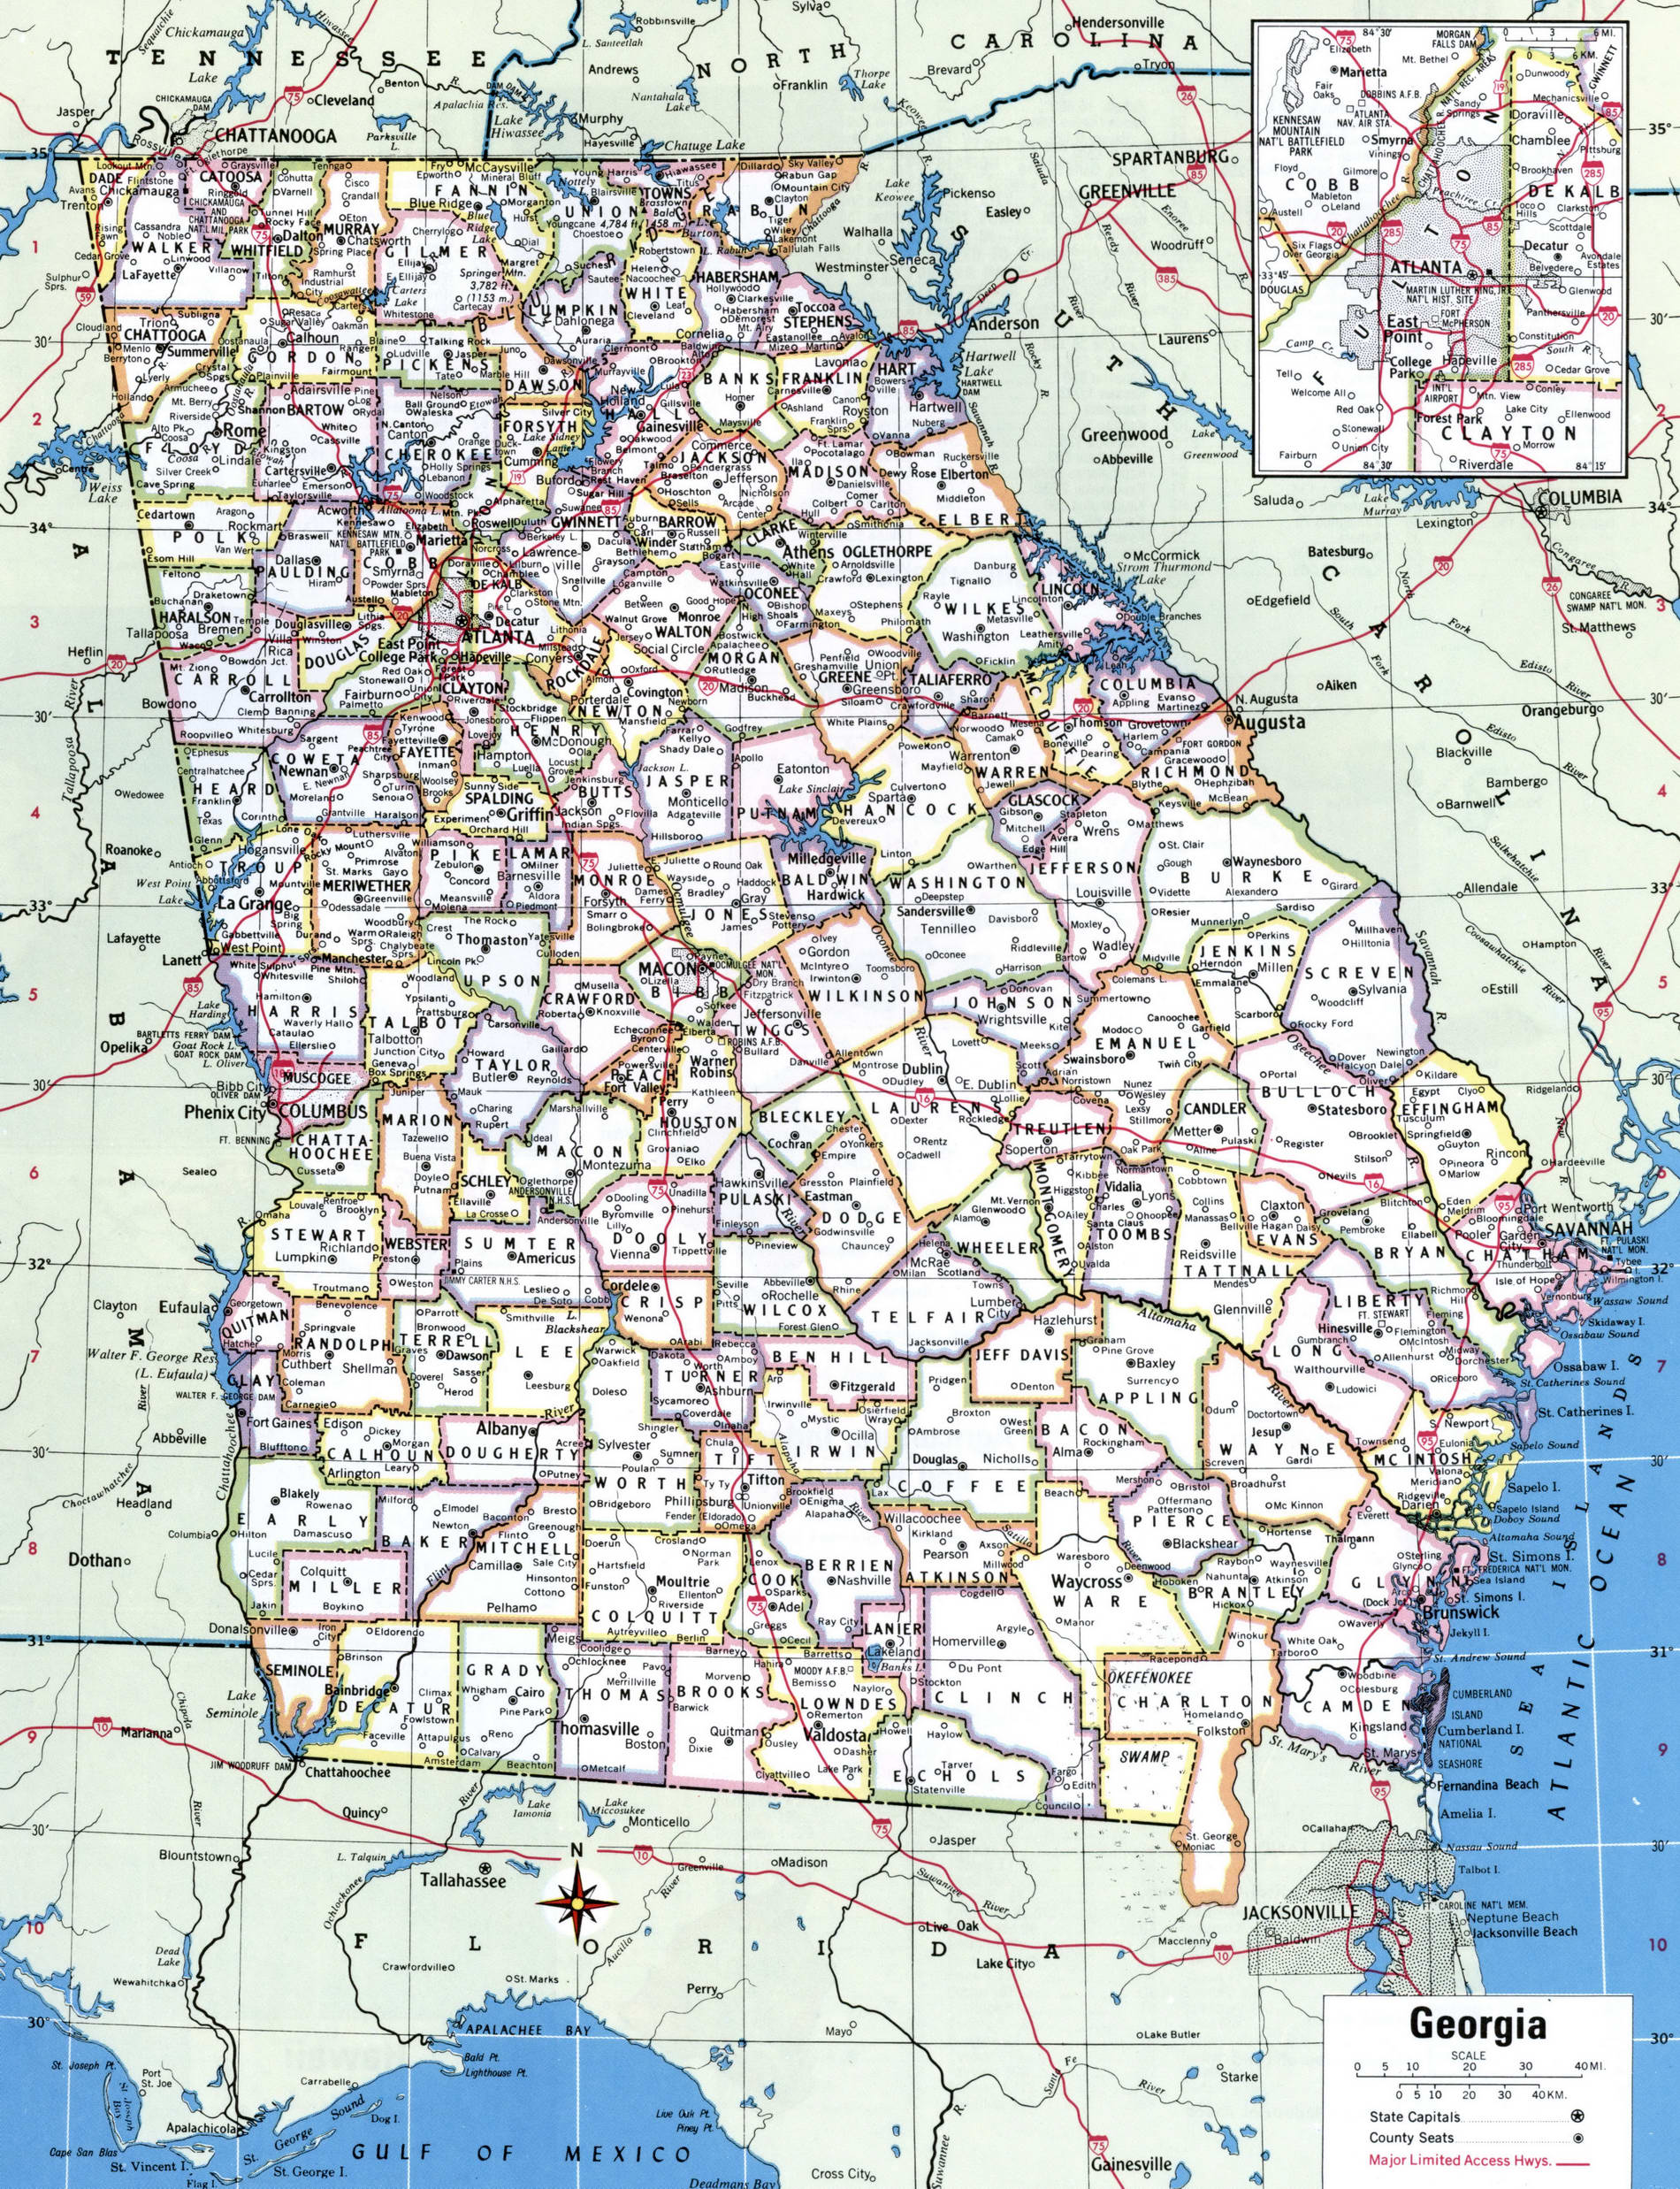 map-of-georgia-showing-county-with-cities-road-highways-counties-towns